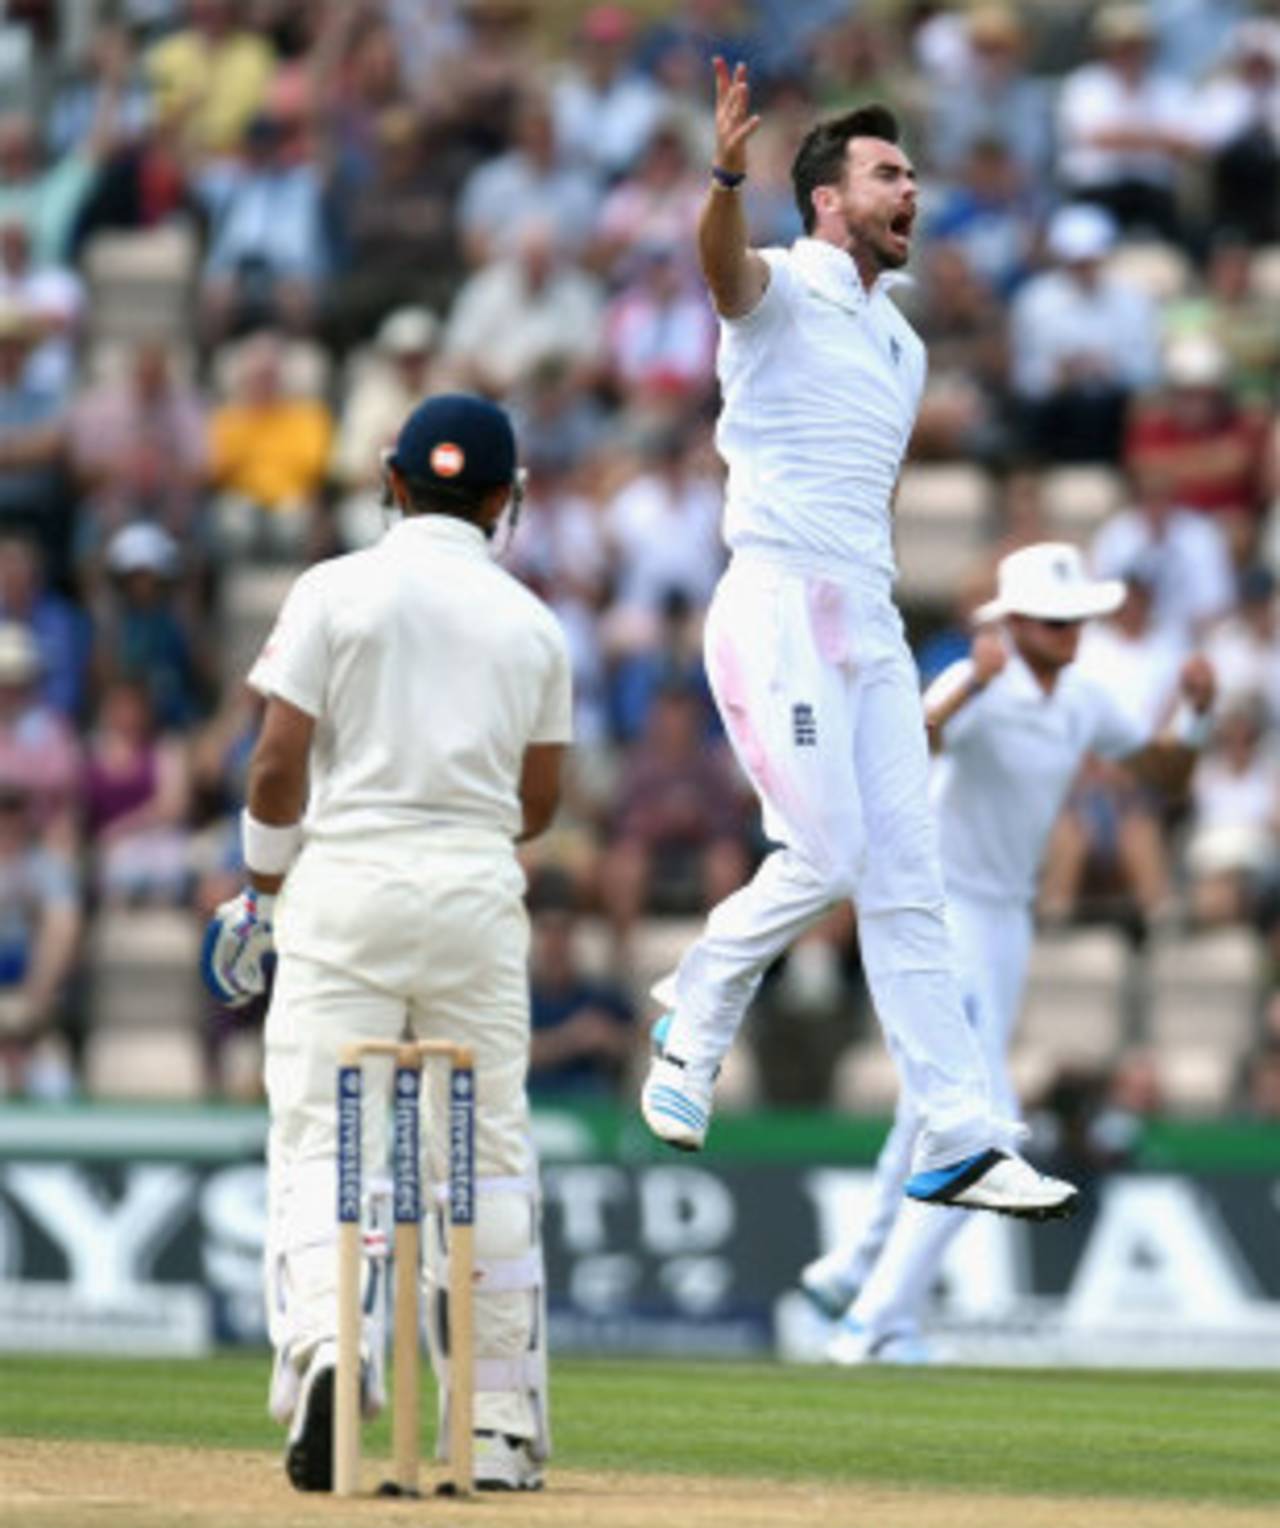 James Anderson roars with the wicket of Virat Kohli, England v India, 3rd Investec Test, Ageas Bowl, 3rd day, July 29, 2014